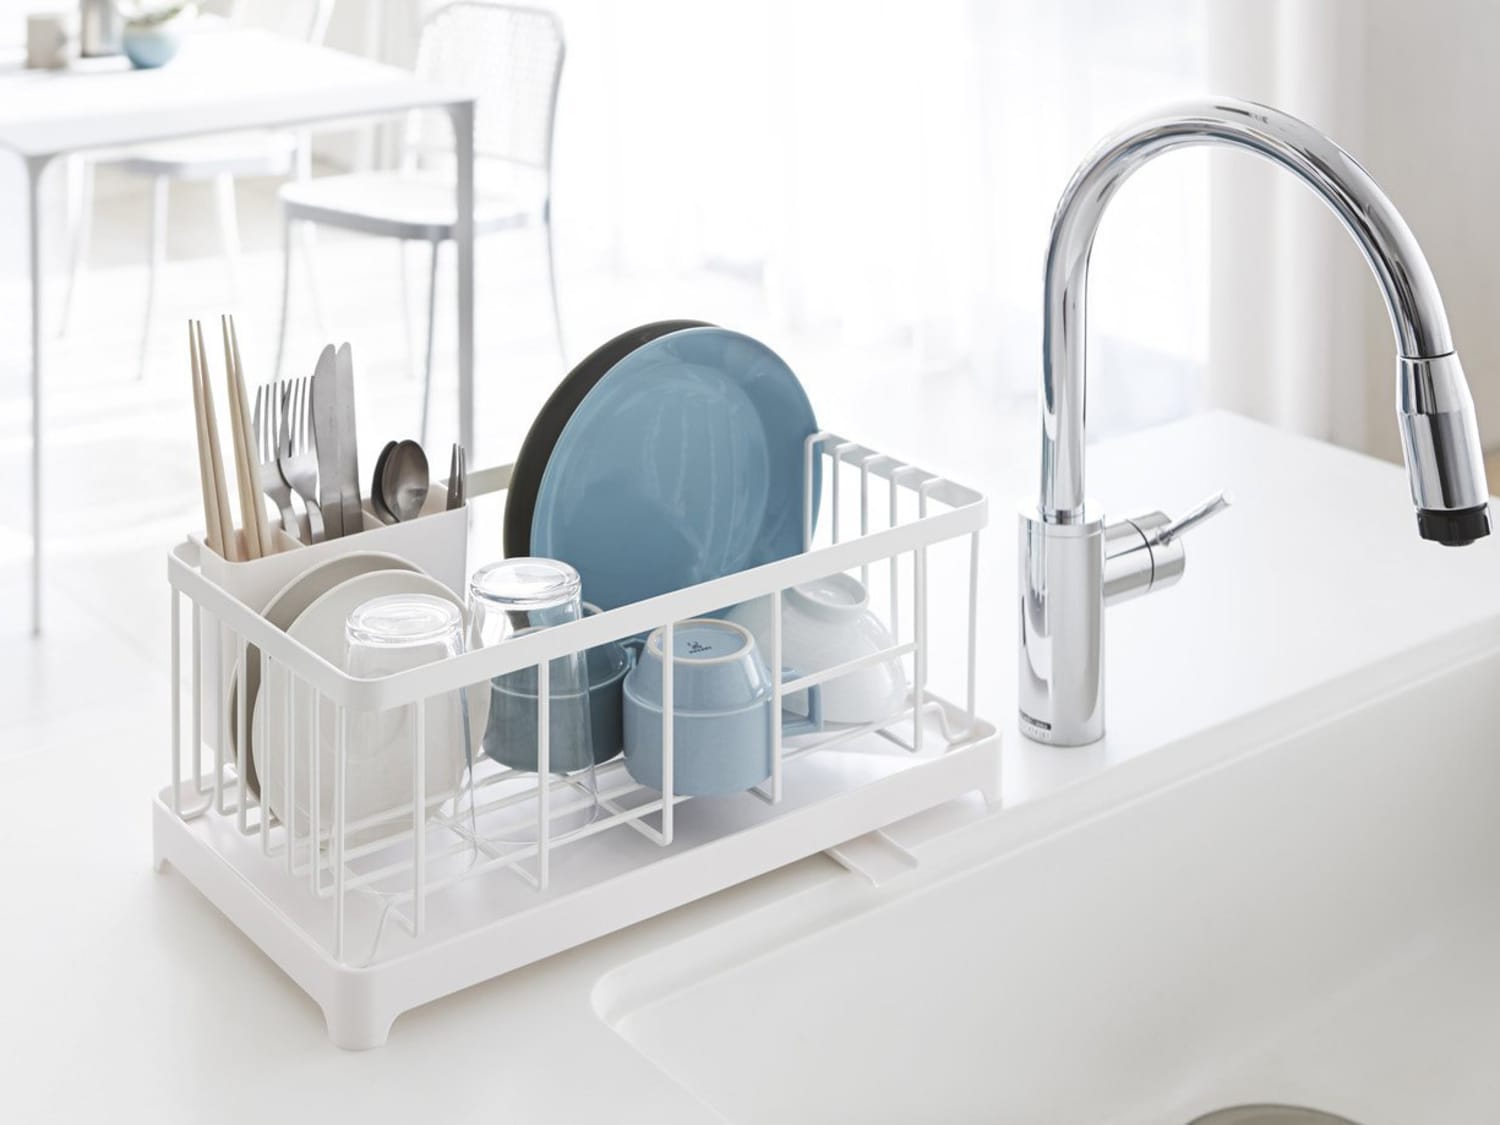 Top 10 Well-Designed Dish Racks for Small Kitchens | Apartment Therapy